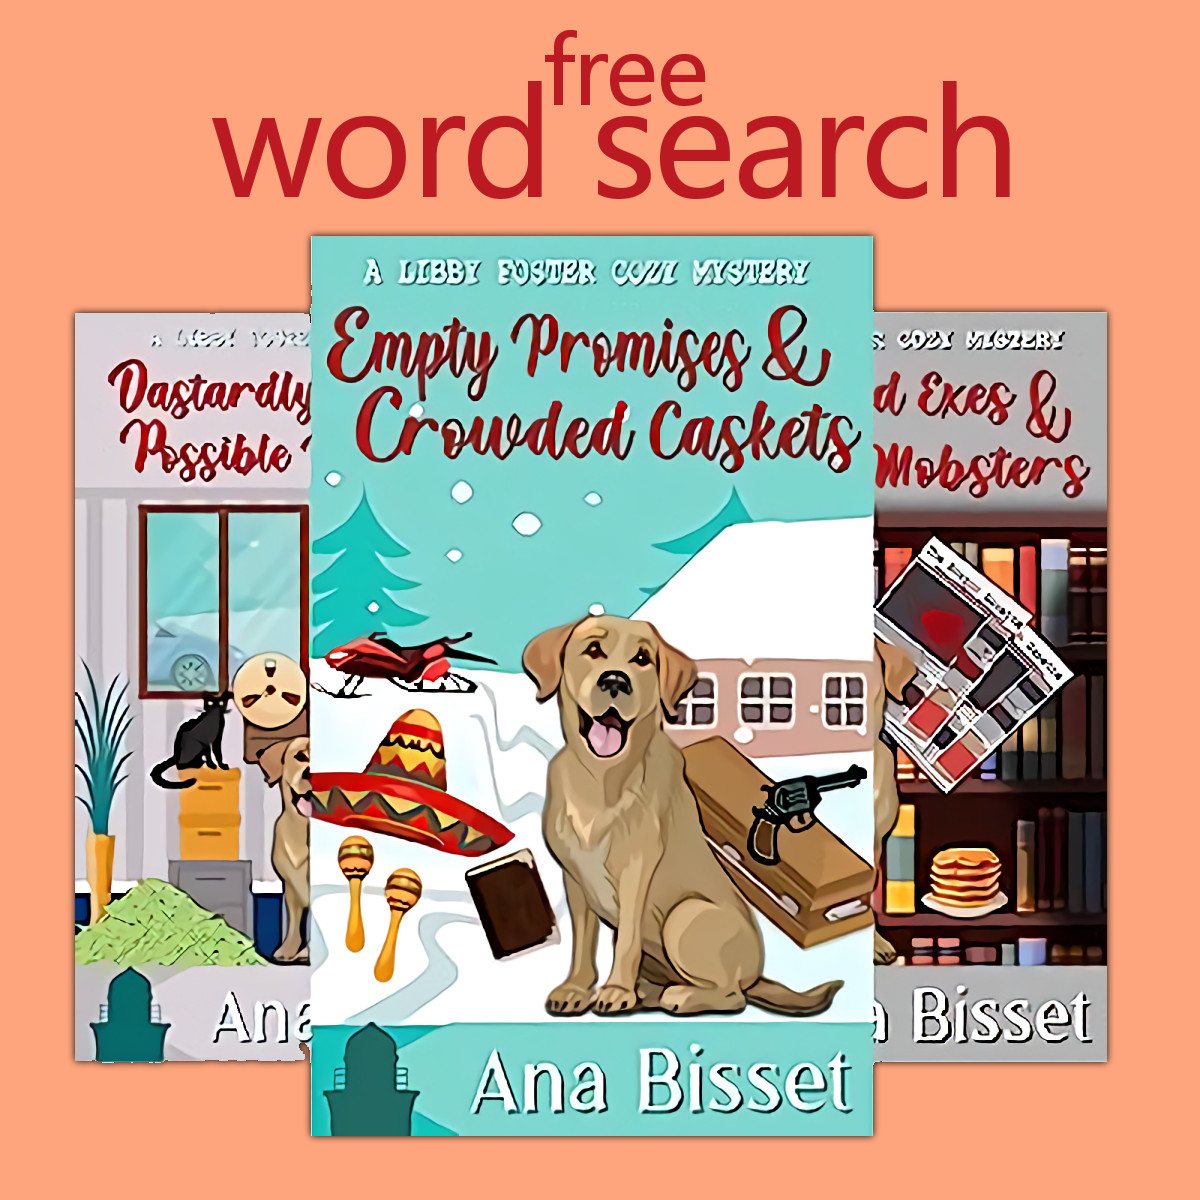 free word search cozy mysteries